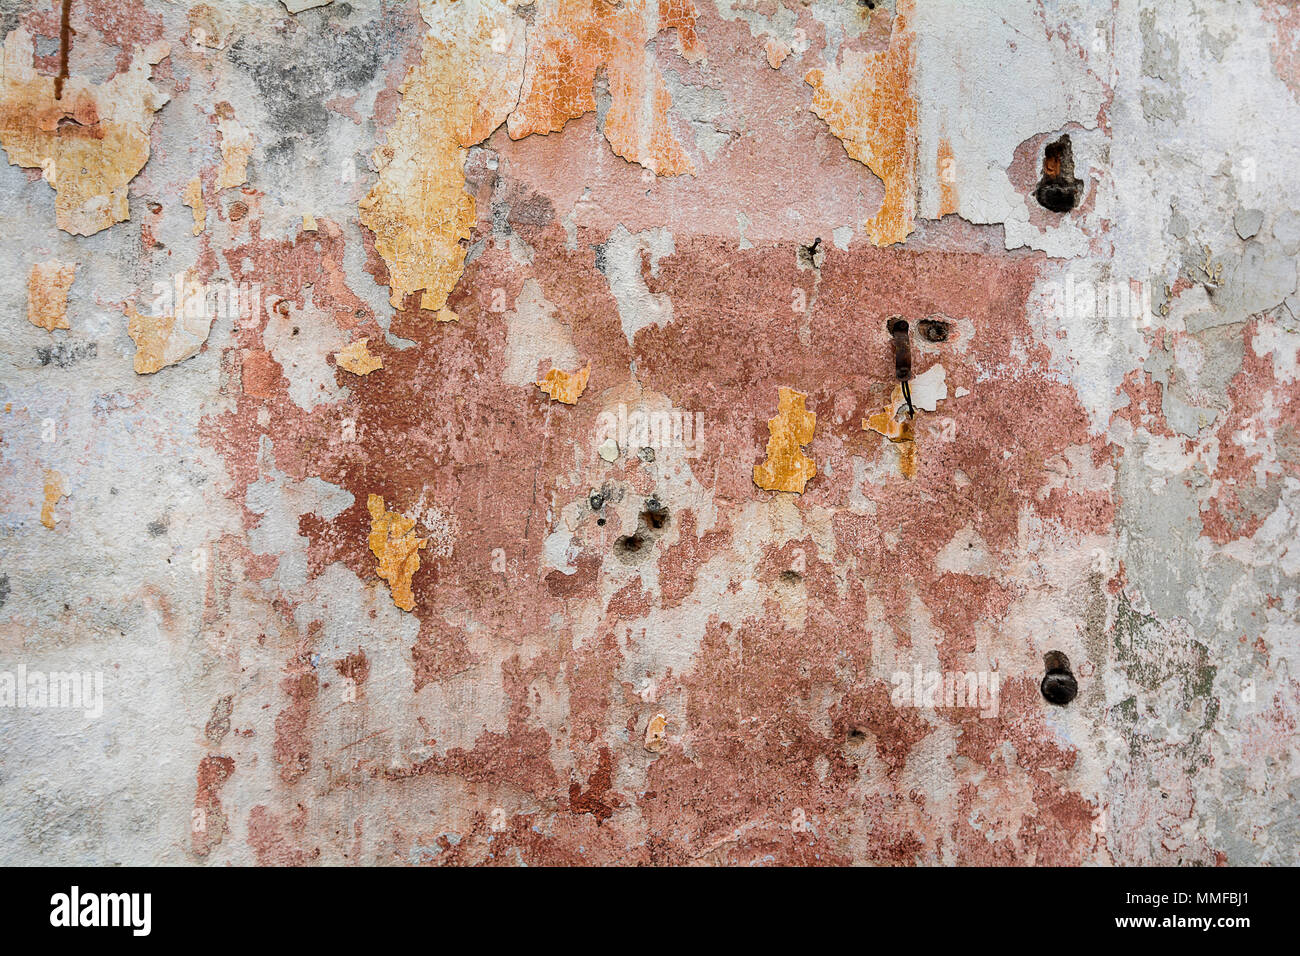 Photo of a colorful old decaying brick wall with peeling paint and stucco. Great for a background image or a texture. Stock Photo